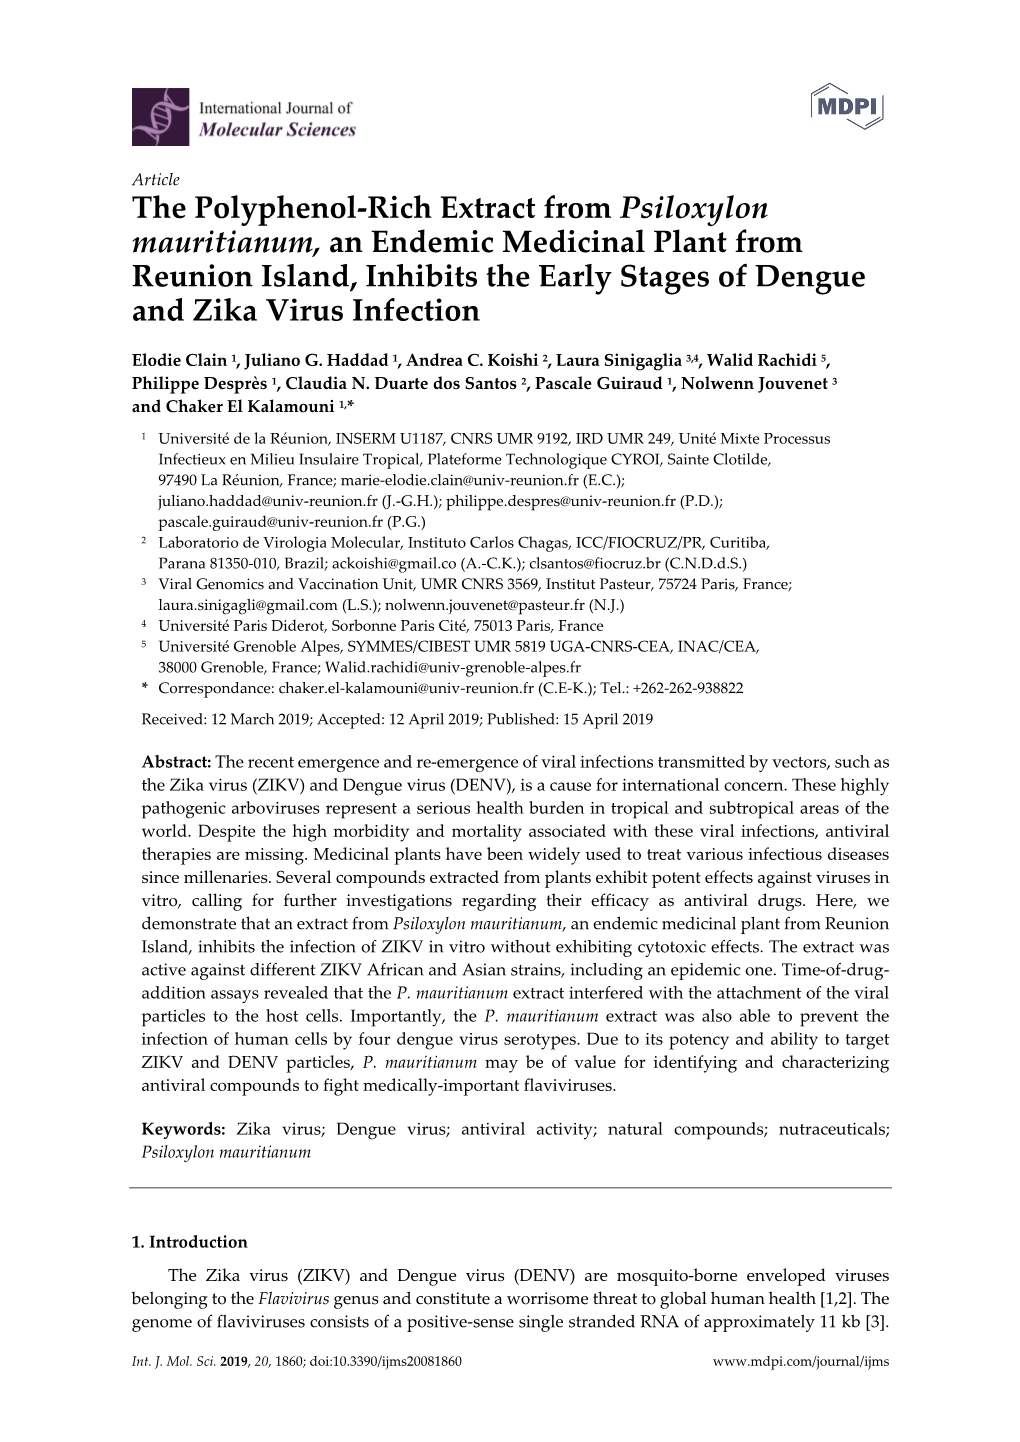 The Polyphenol-Rich Extract from Psiloxylon Mauritianum, an Endemic Medicinal Plant from Reunion Island, Inhibits the Early Stages of Dengue and Zika Virus Infection